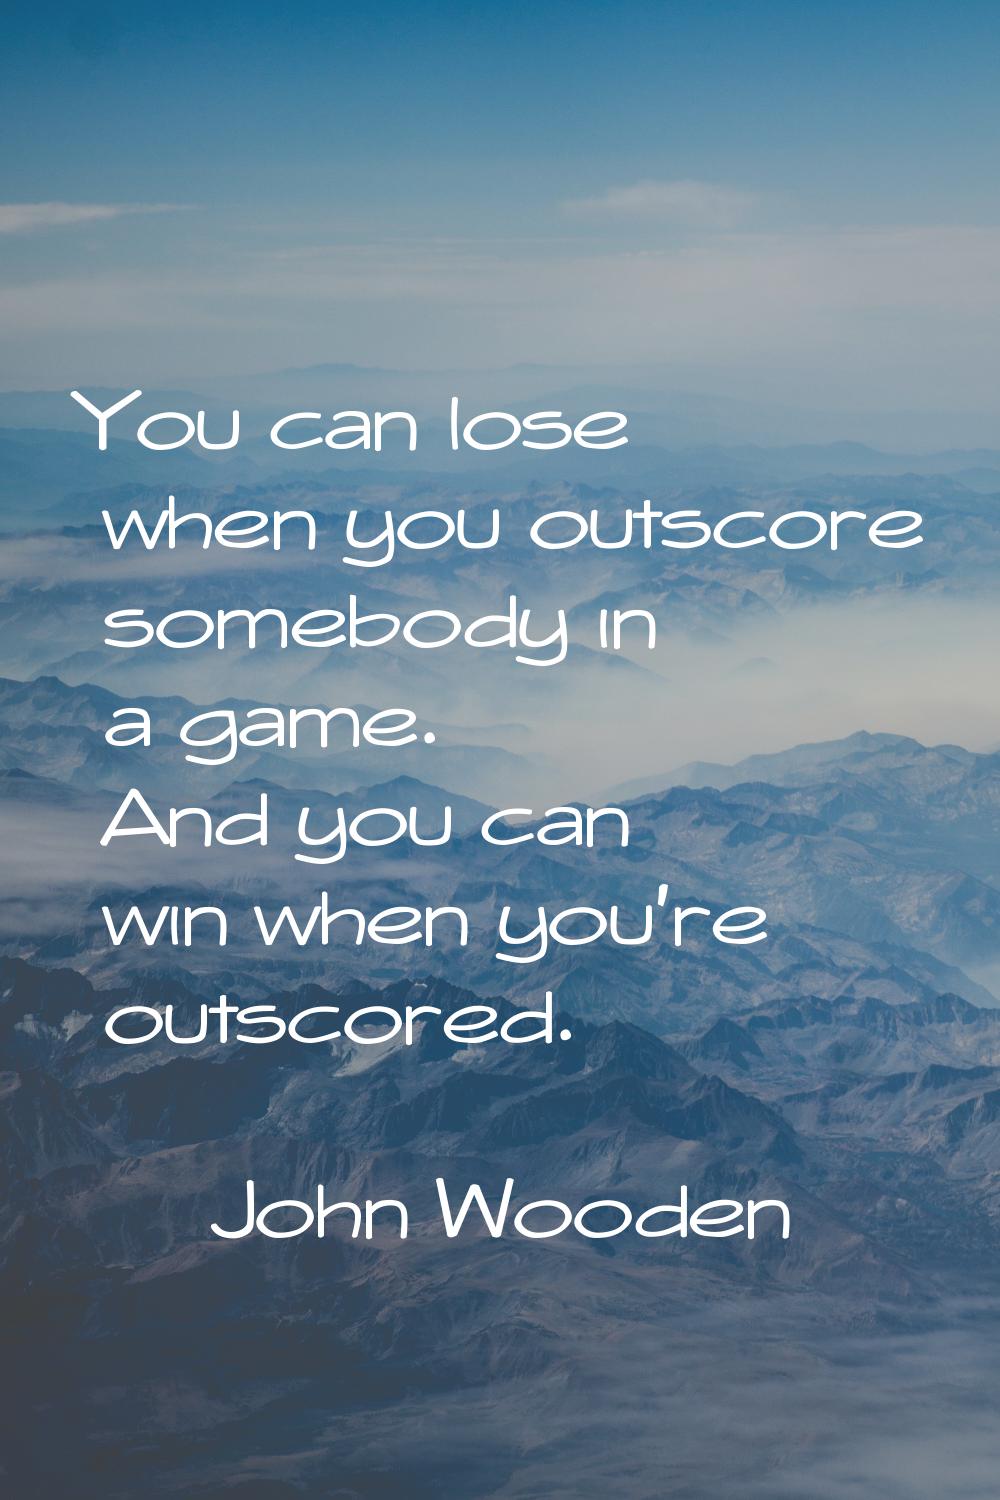 You can lose when you outscore somebody in a game. And you can win when you're outscored.